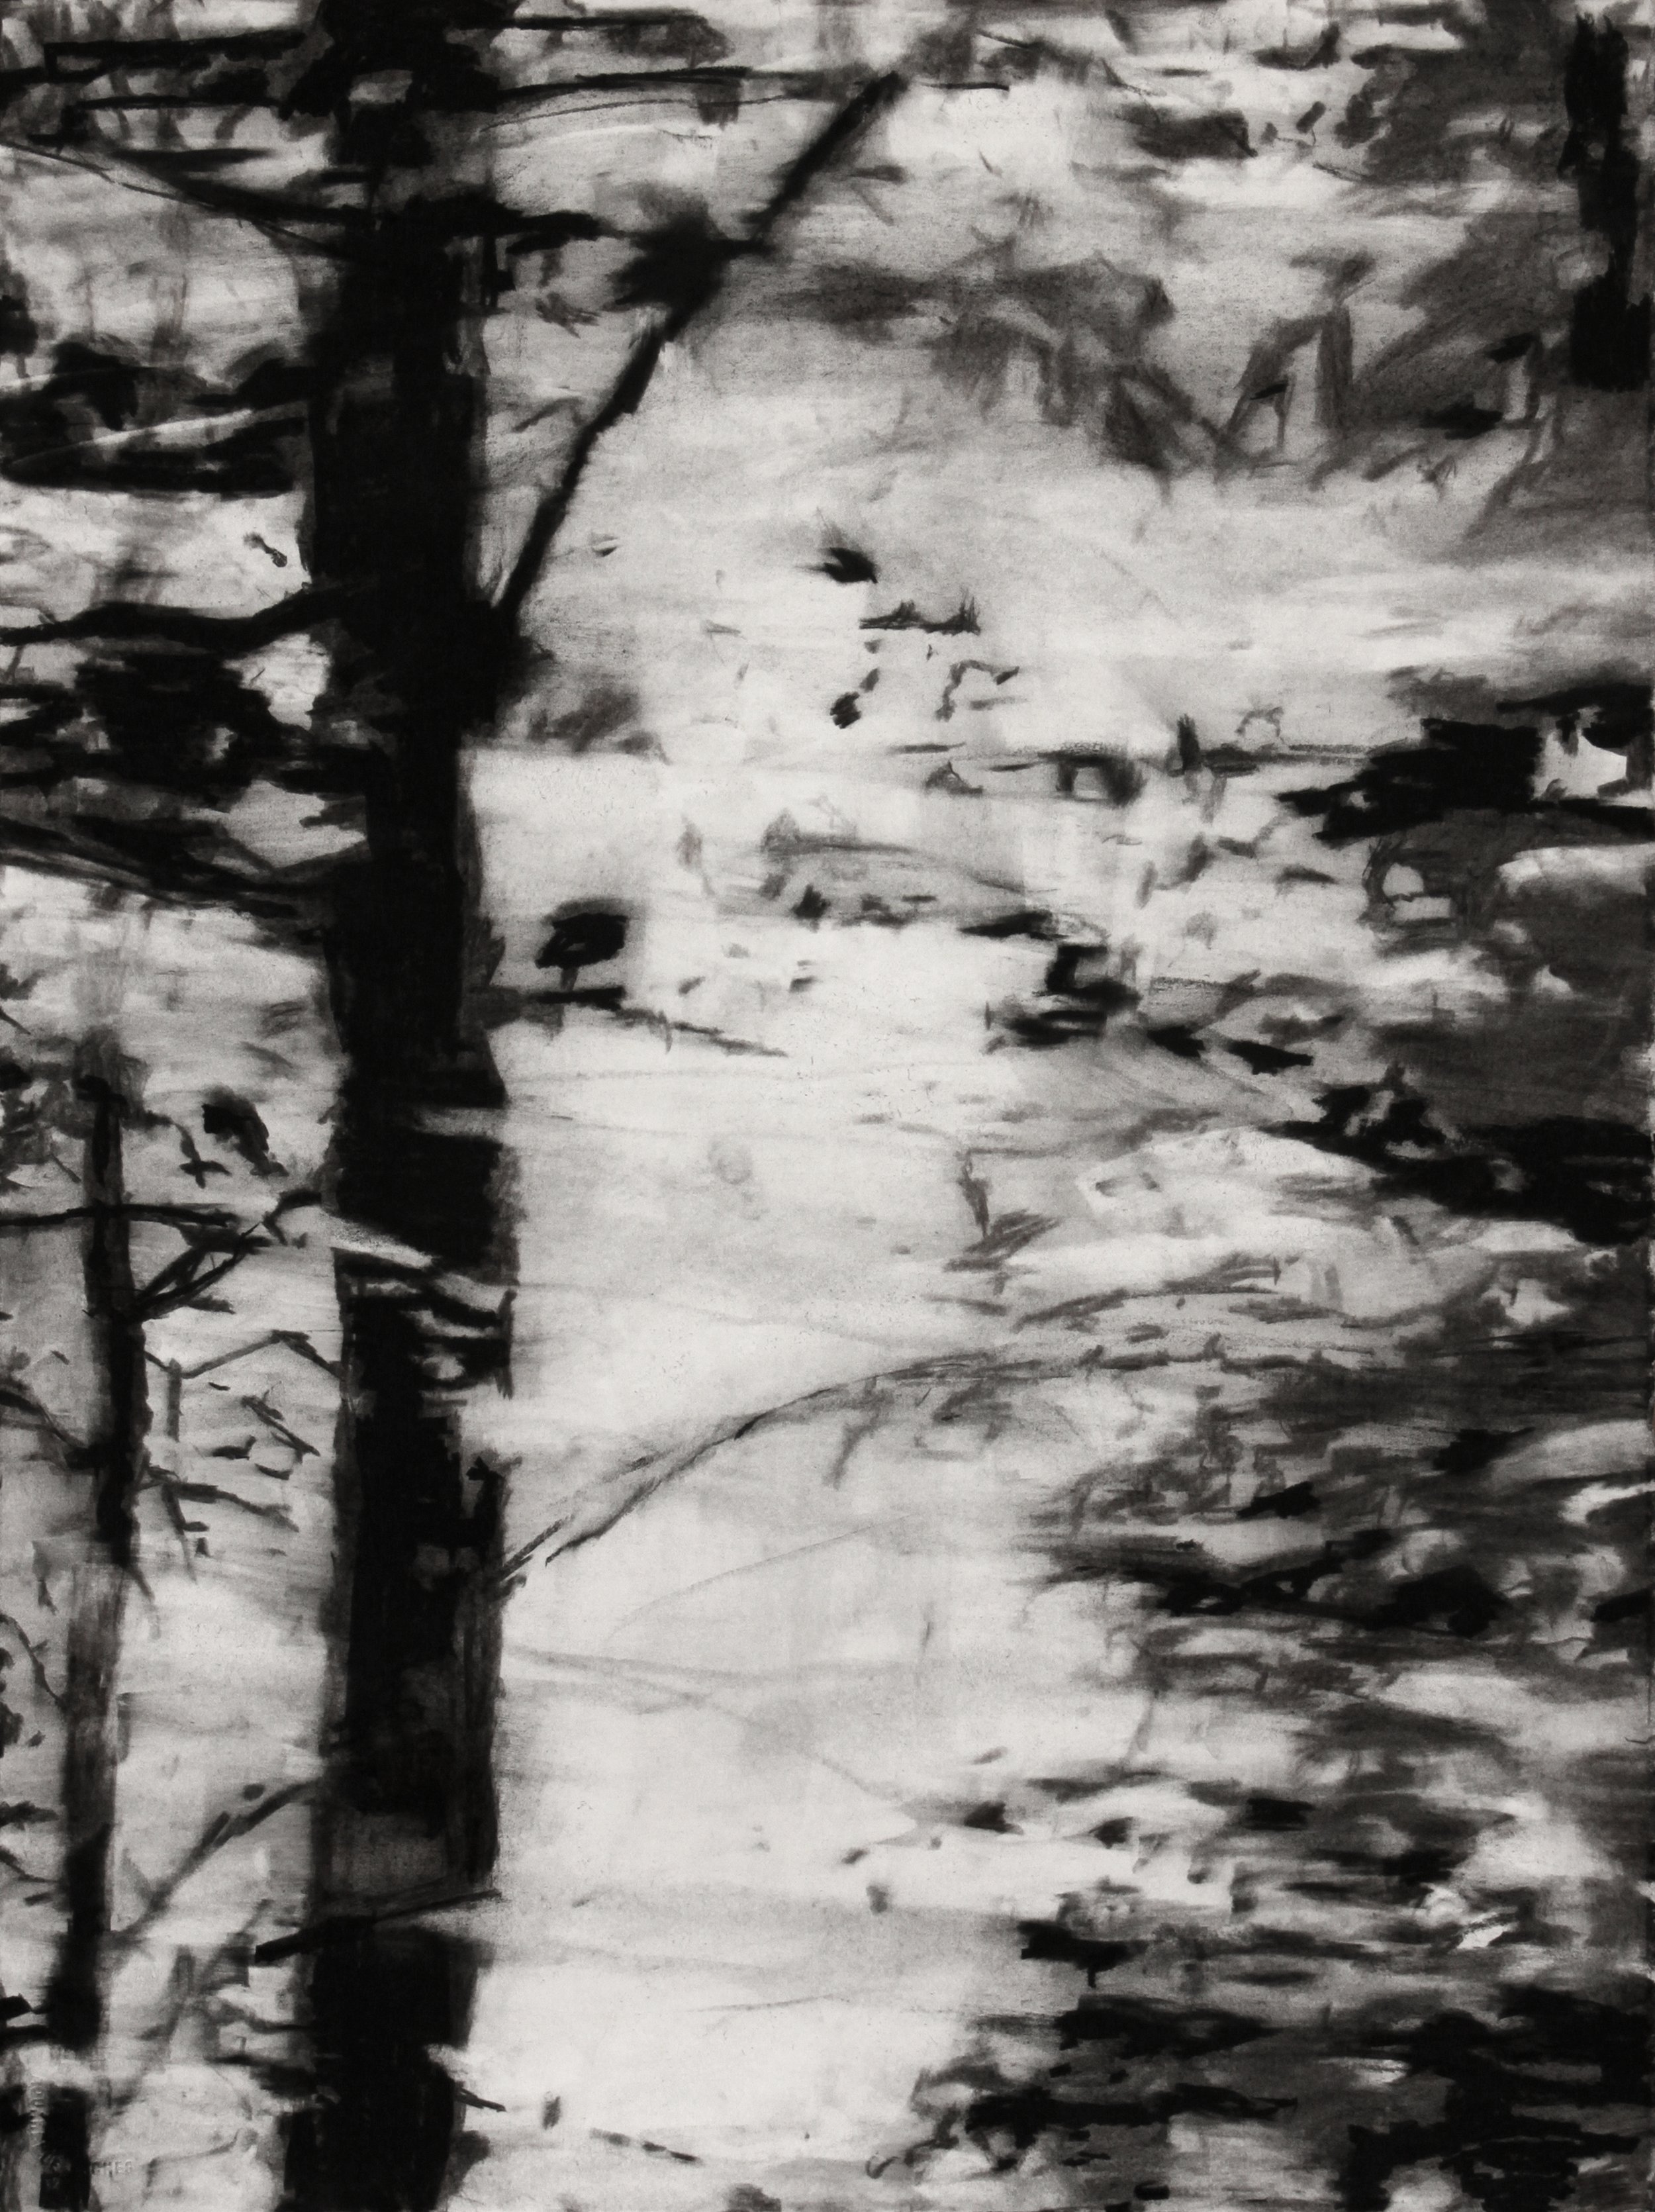   Forest       2021  Charcoal on Paper      30” x 22”   